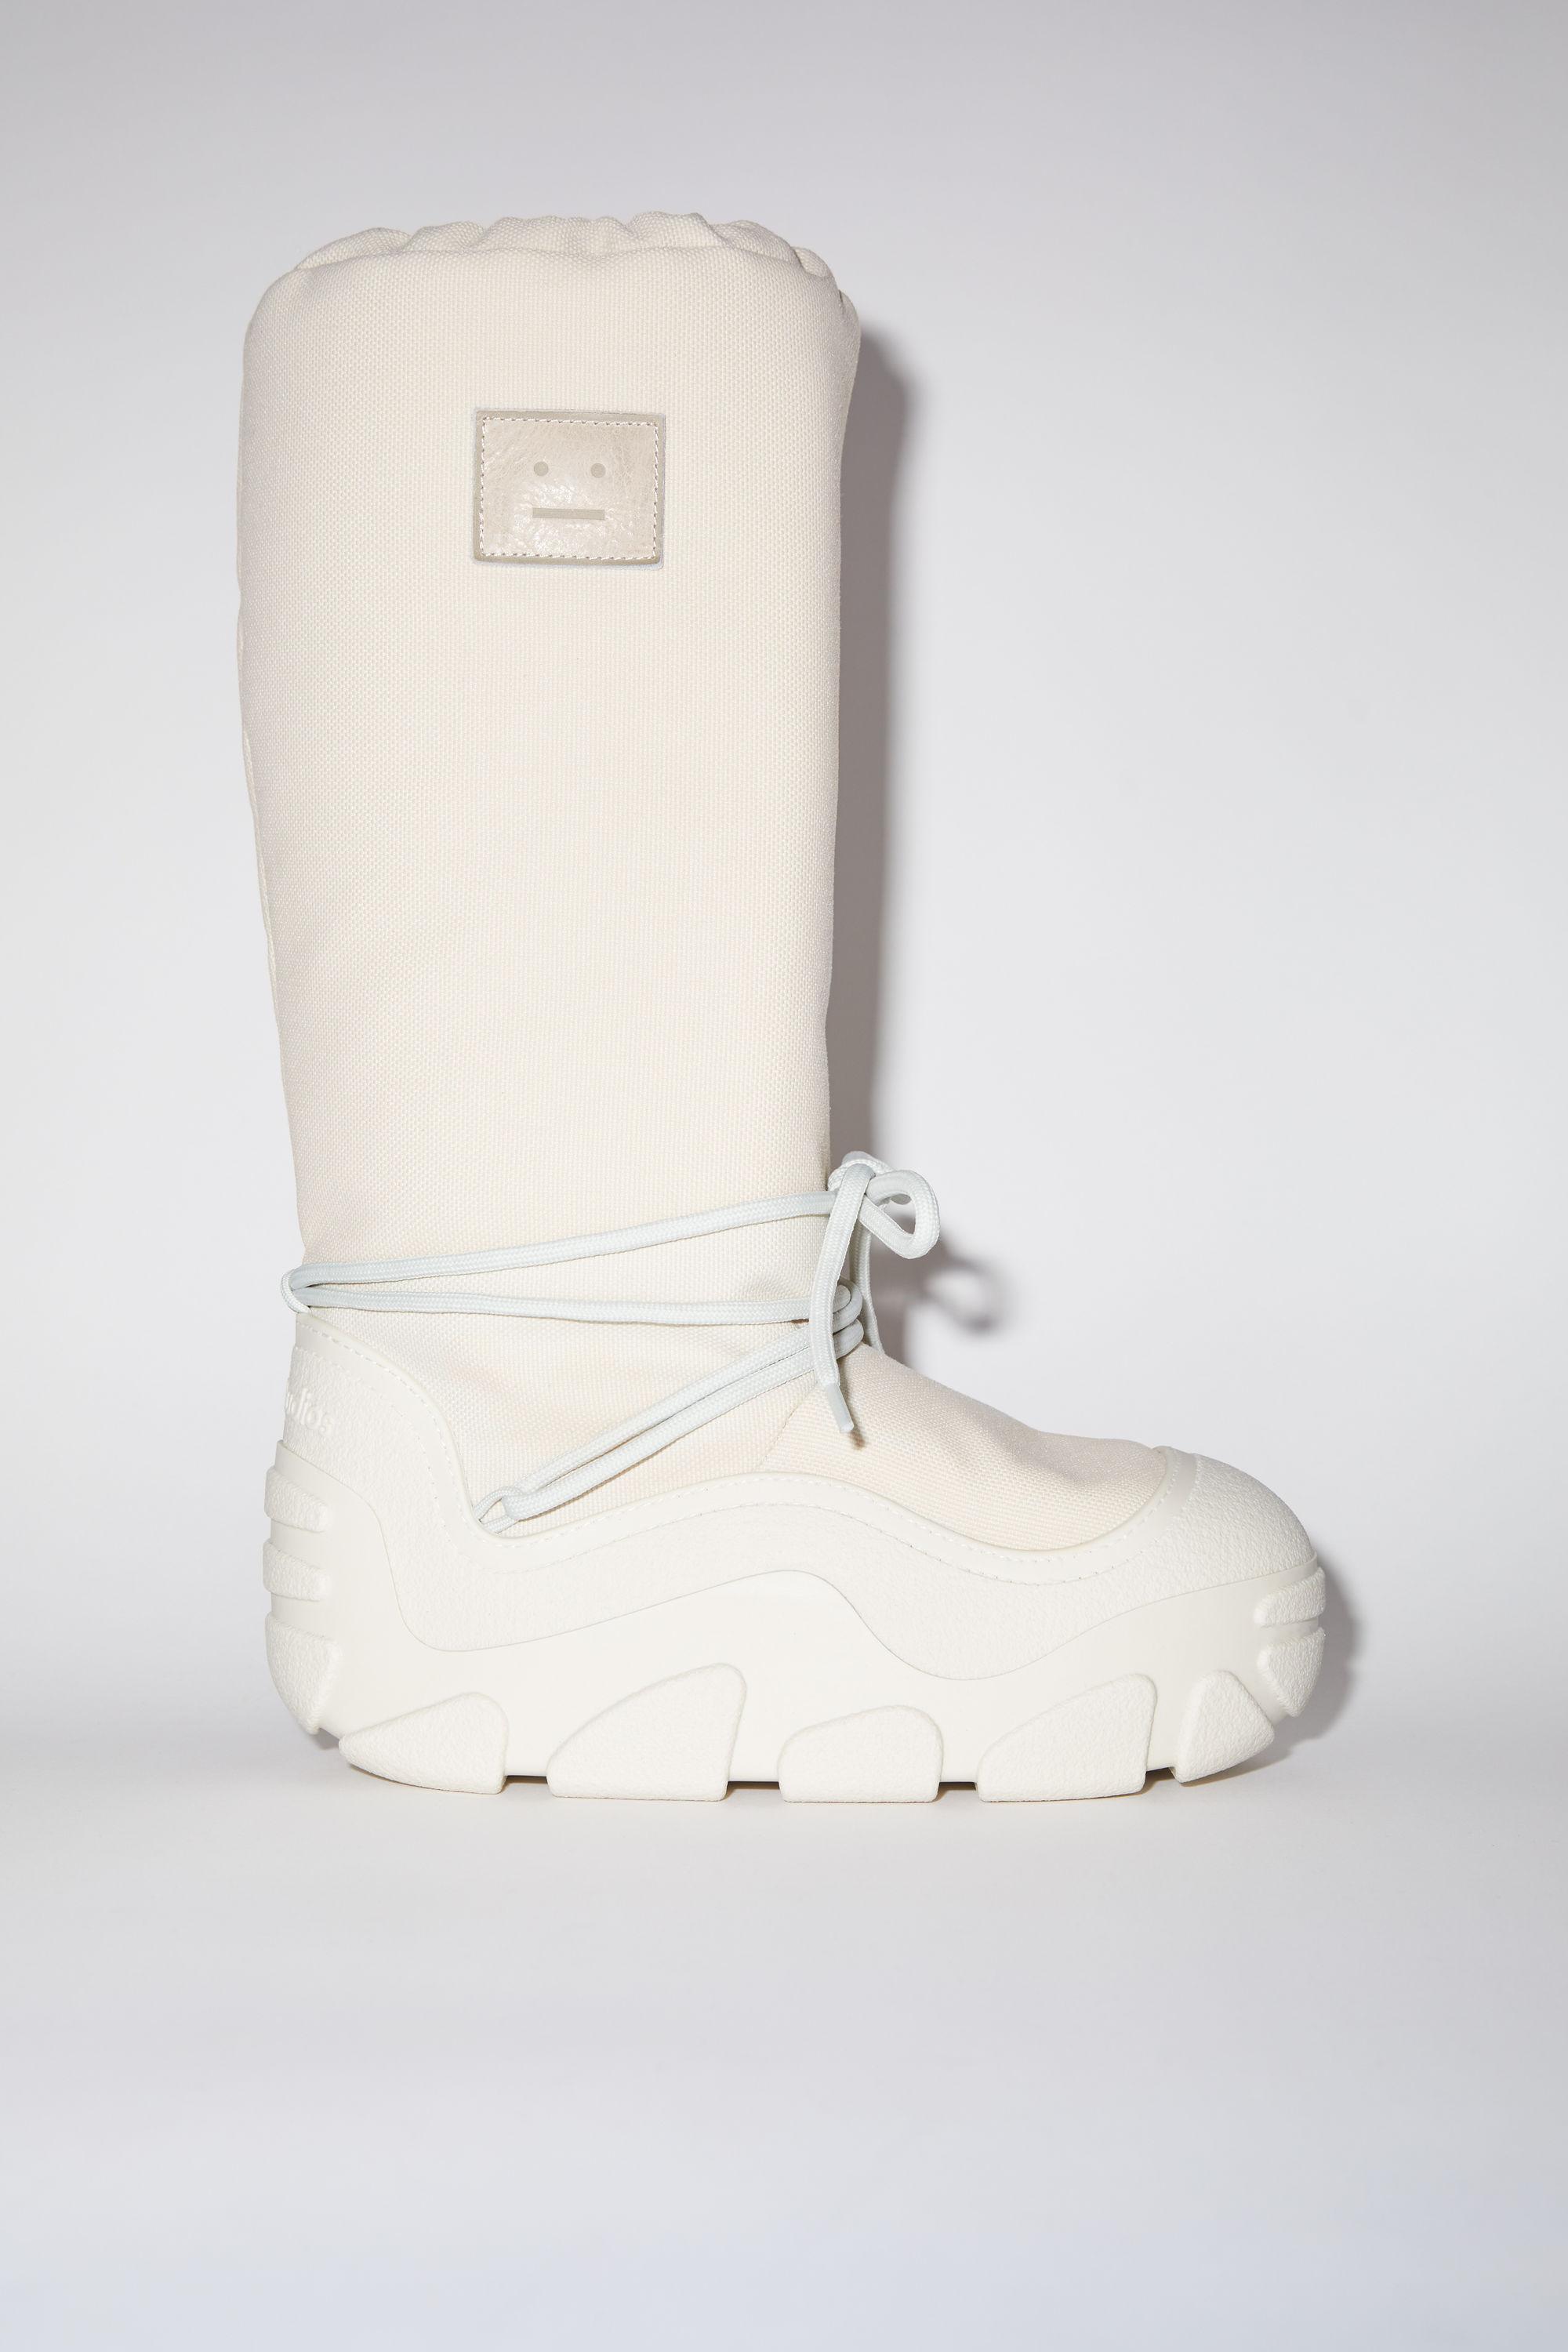 Acne Studios Platform Snow Boots in Natural | Lyst